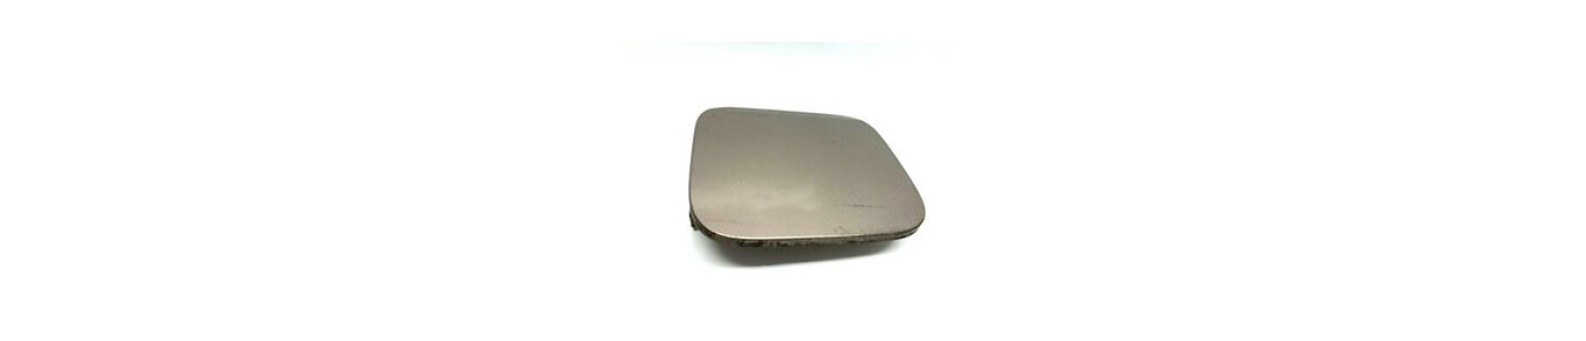 Fuel Tank Covers